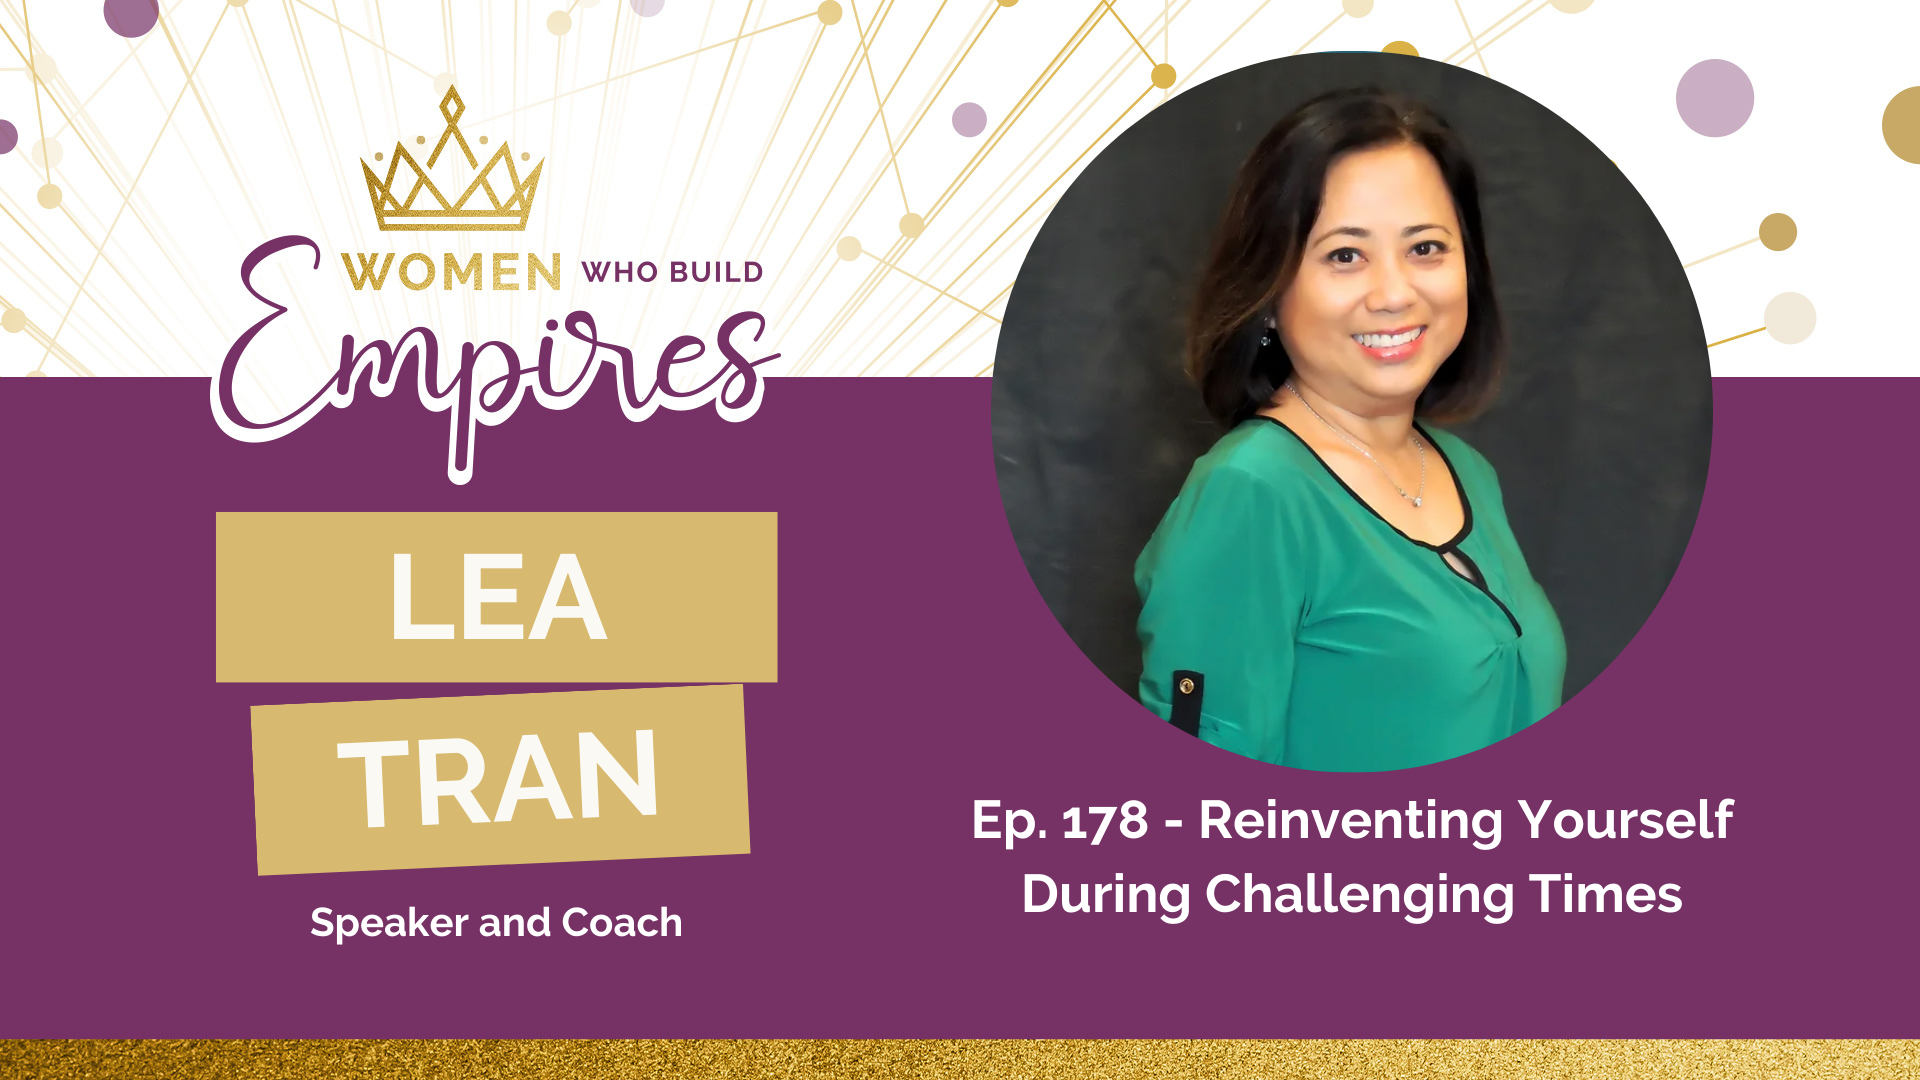 Ep. 178 Lea Tran Reinventing Yourself During Challenging Times